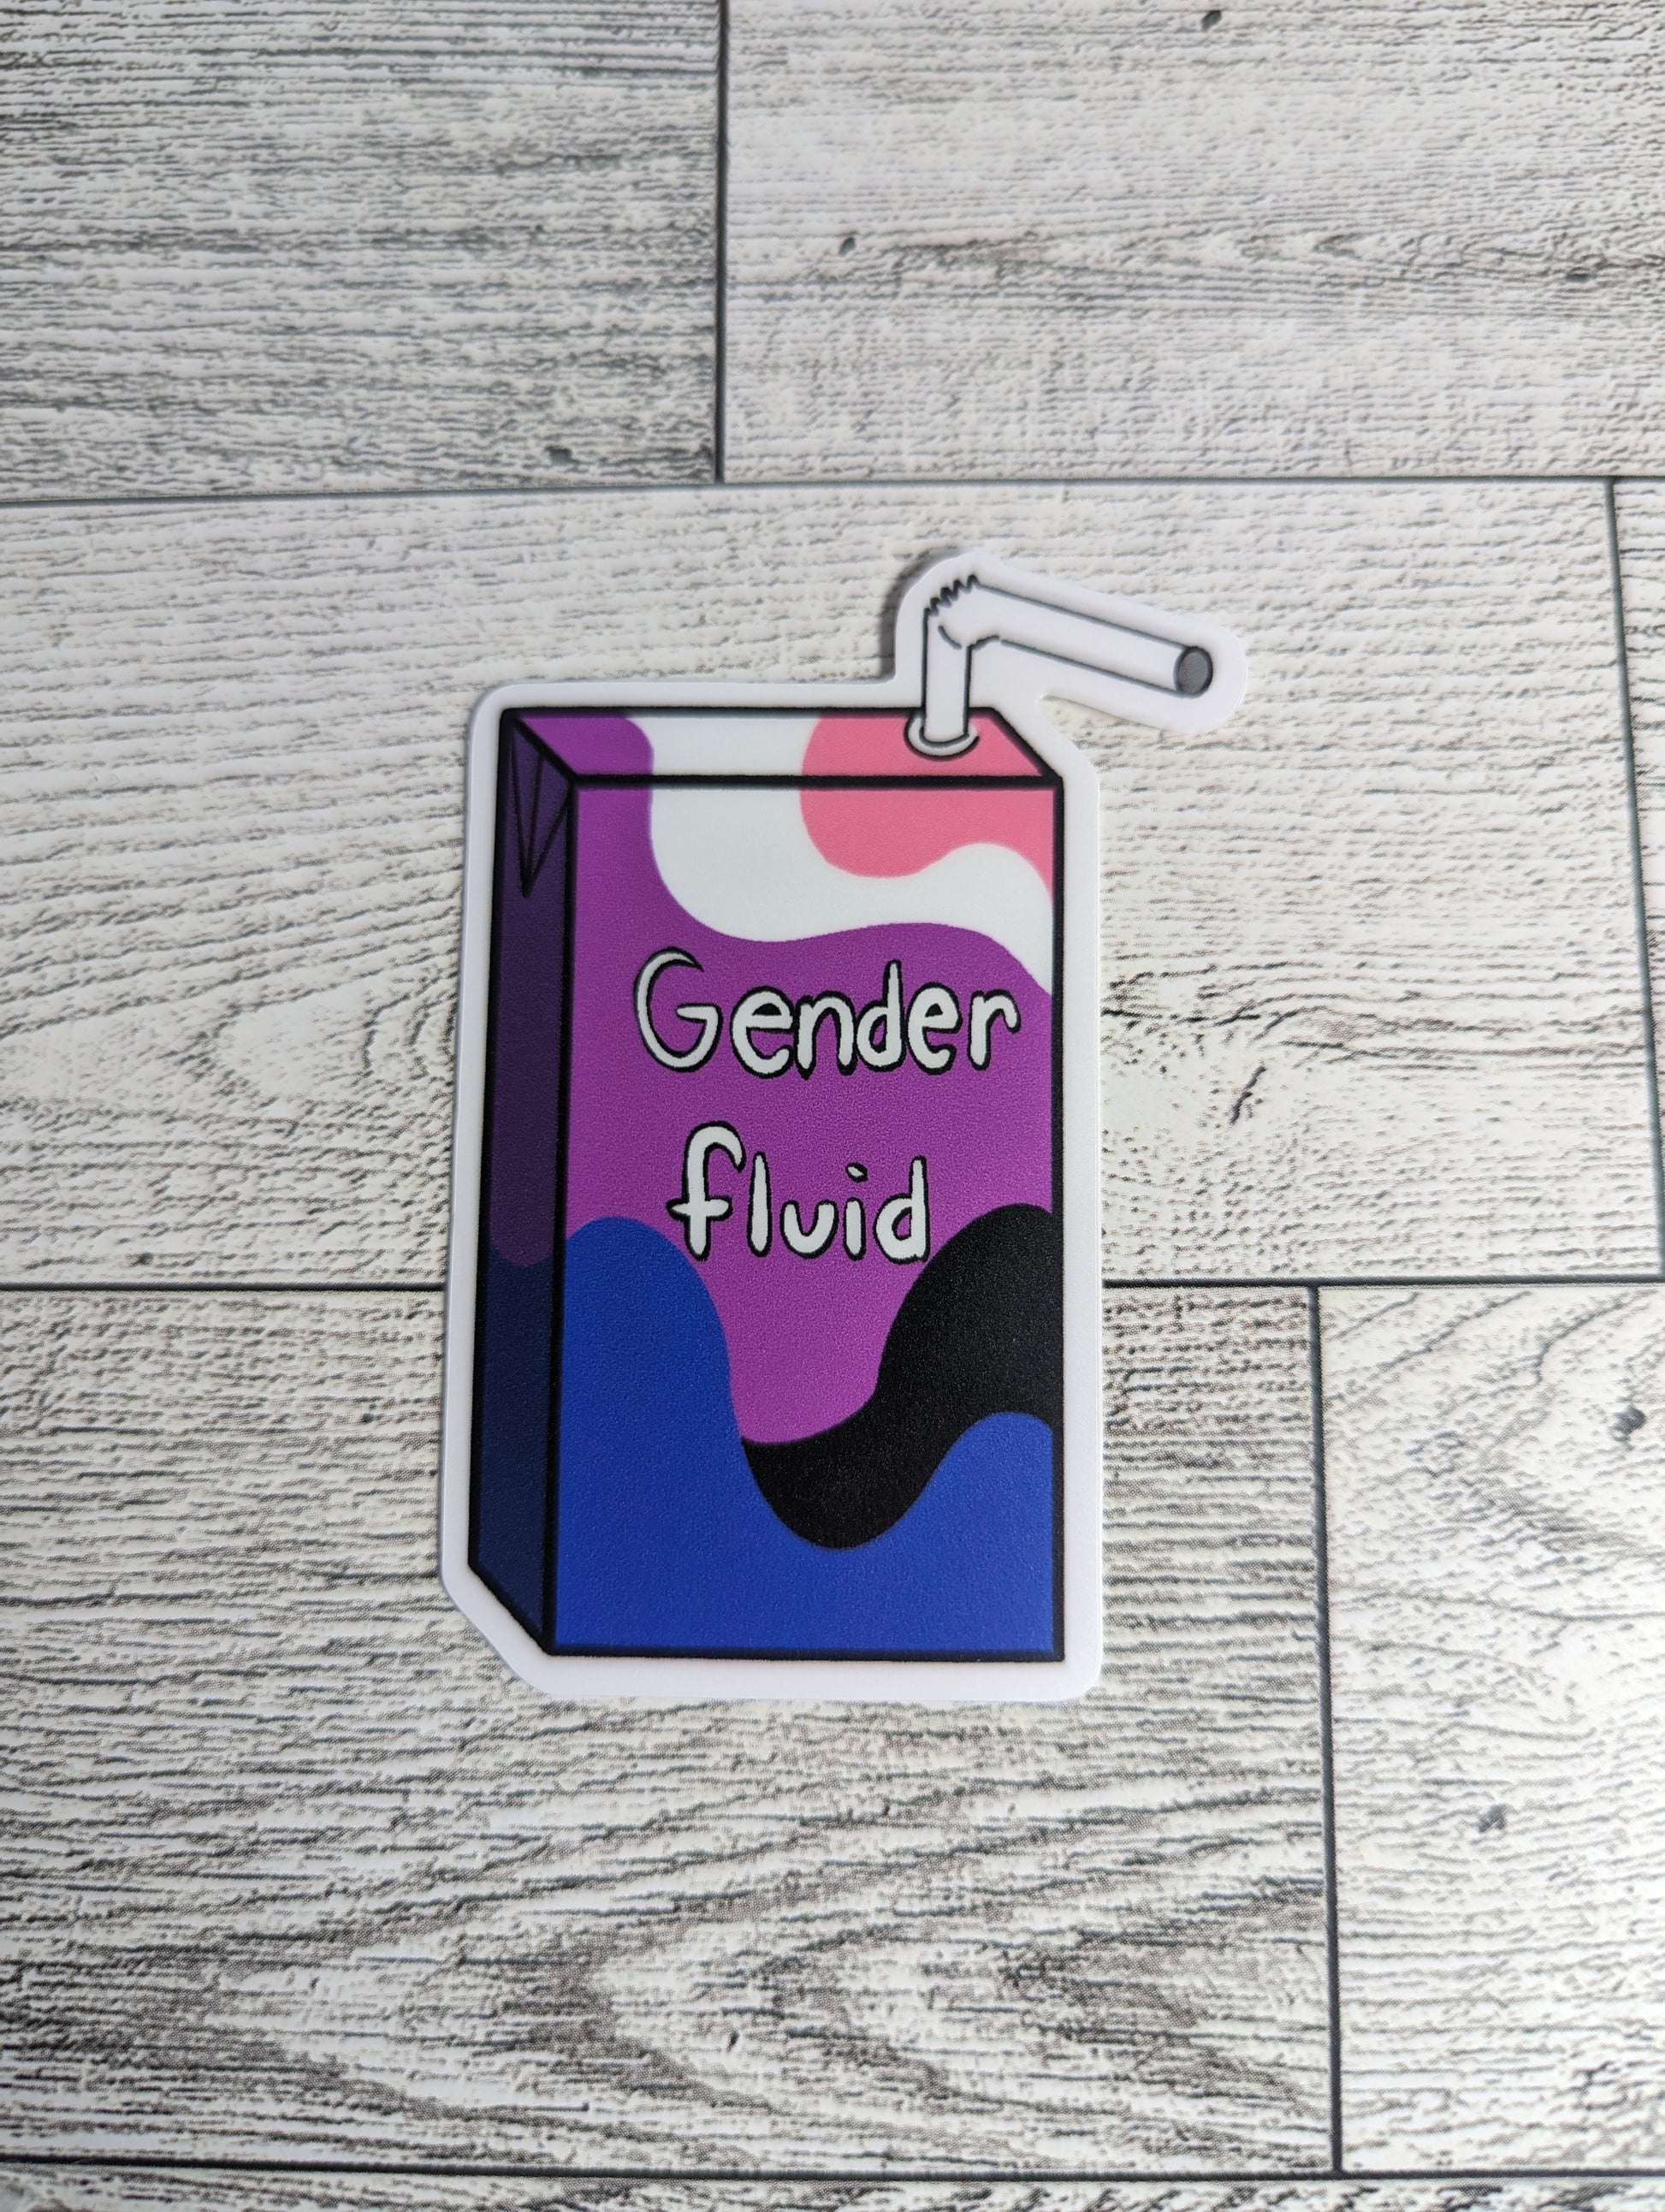 A juice box sticker with the words "Gender fluid" on it. The colors are of the genderfluid flag. The backdrop is a light wood.